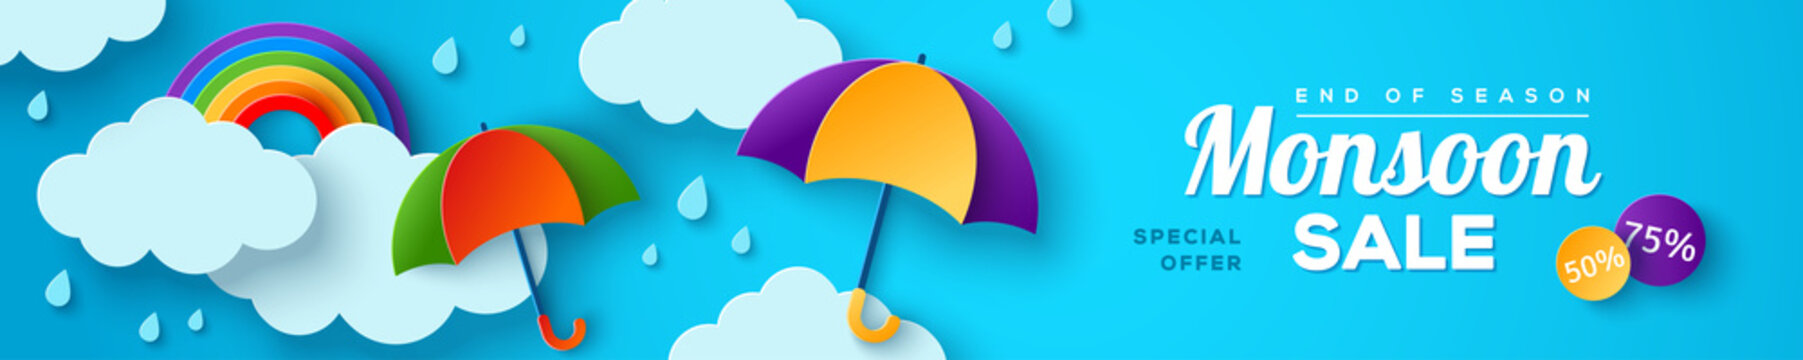 Monsoon sale offer banner template with paper cut clouds, rainbow and colorful umbrella on blue background. Vector illustration. Place for text. Overcast sky with rain